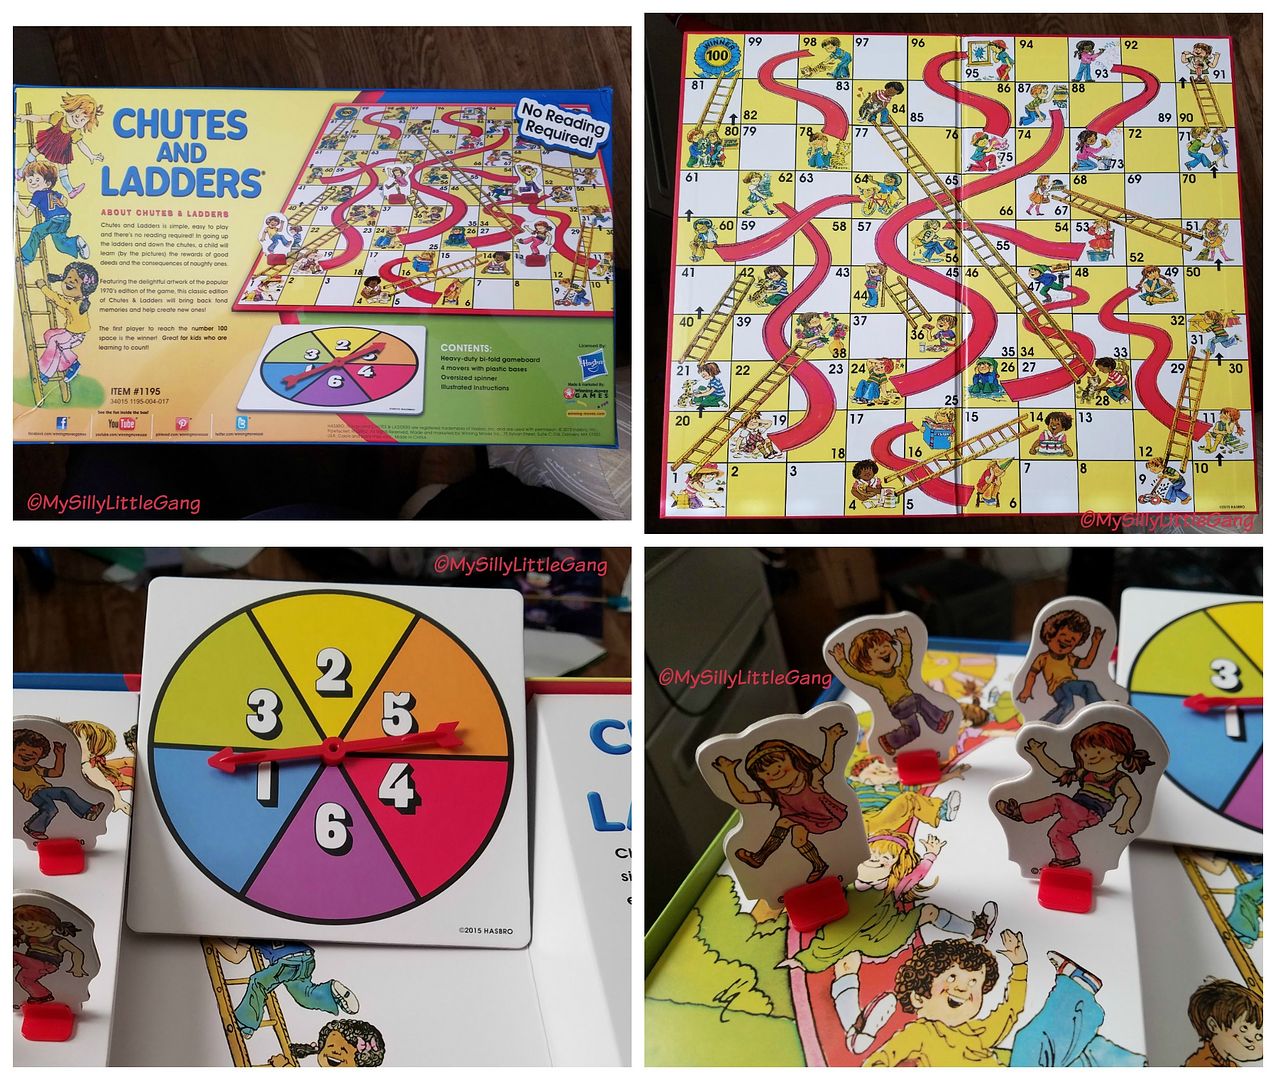 winning moves games chutes and ladders